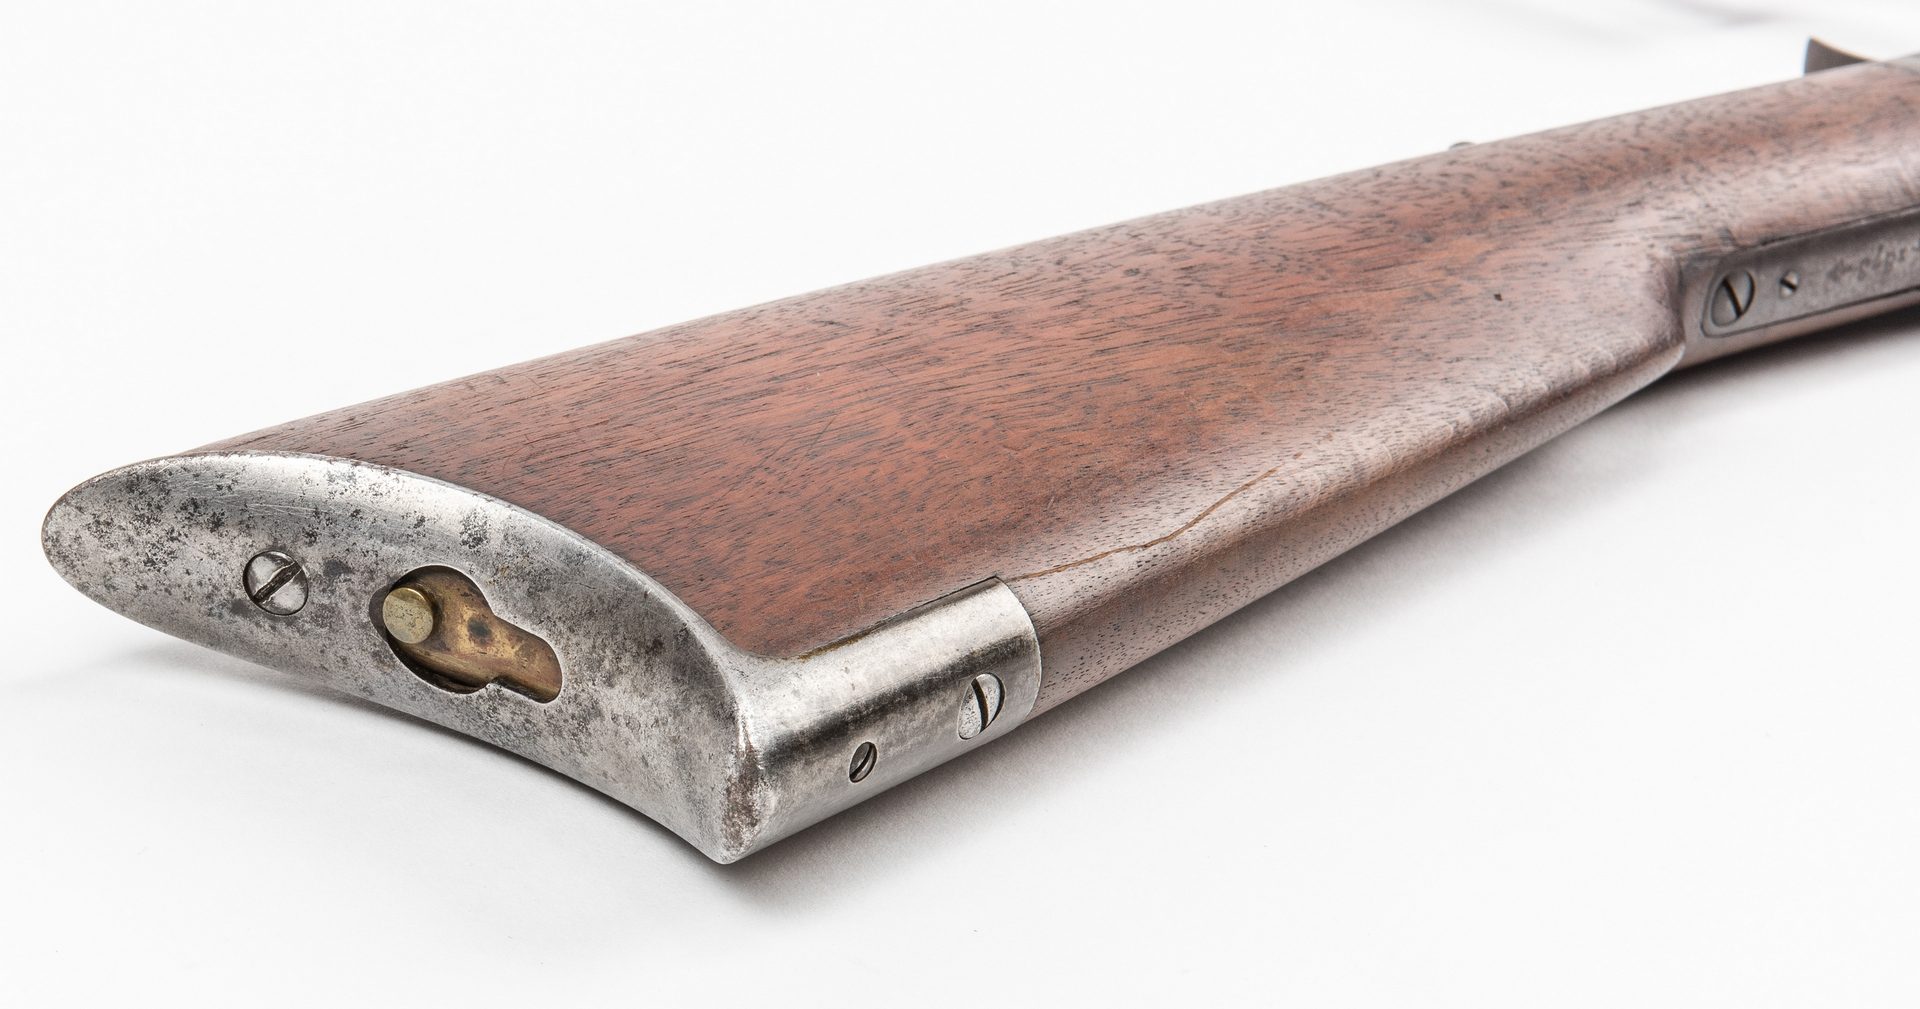 Lot 785: Winchester Model 1873, 32-20 Win Lever Action Rifle